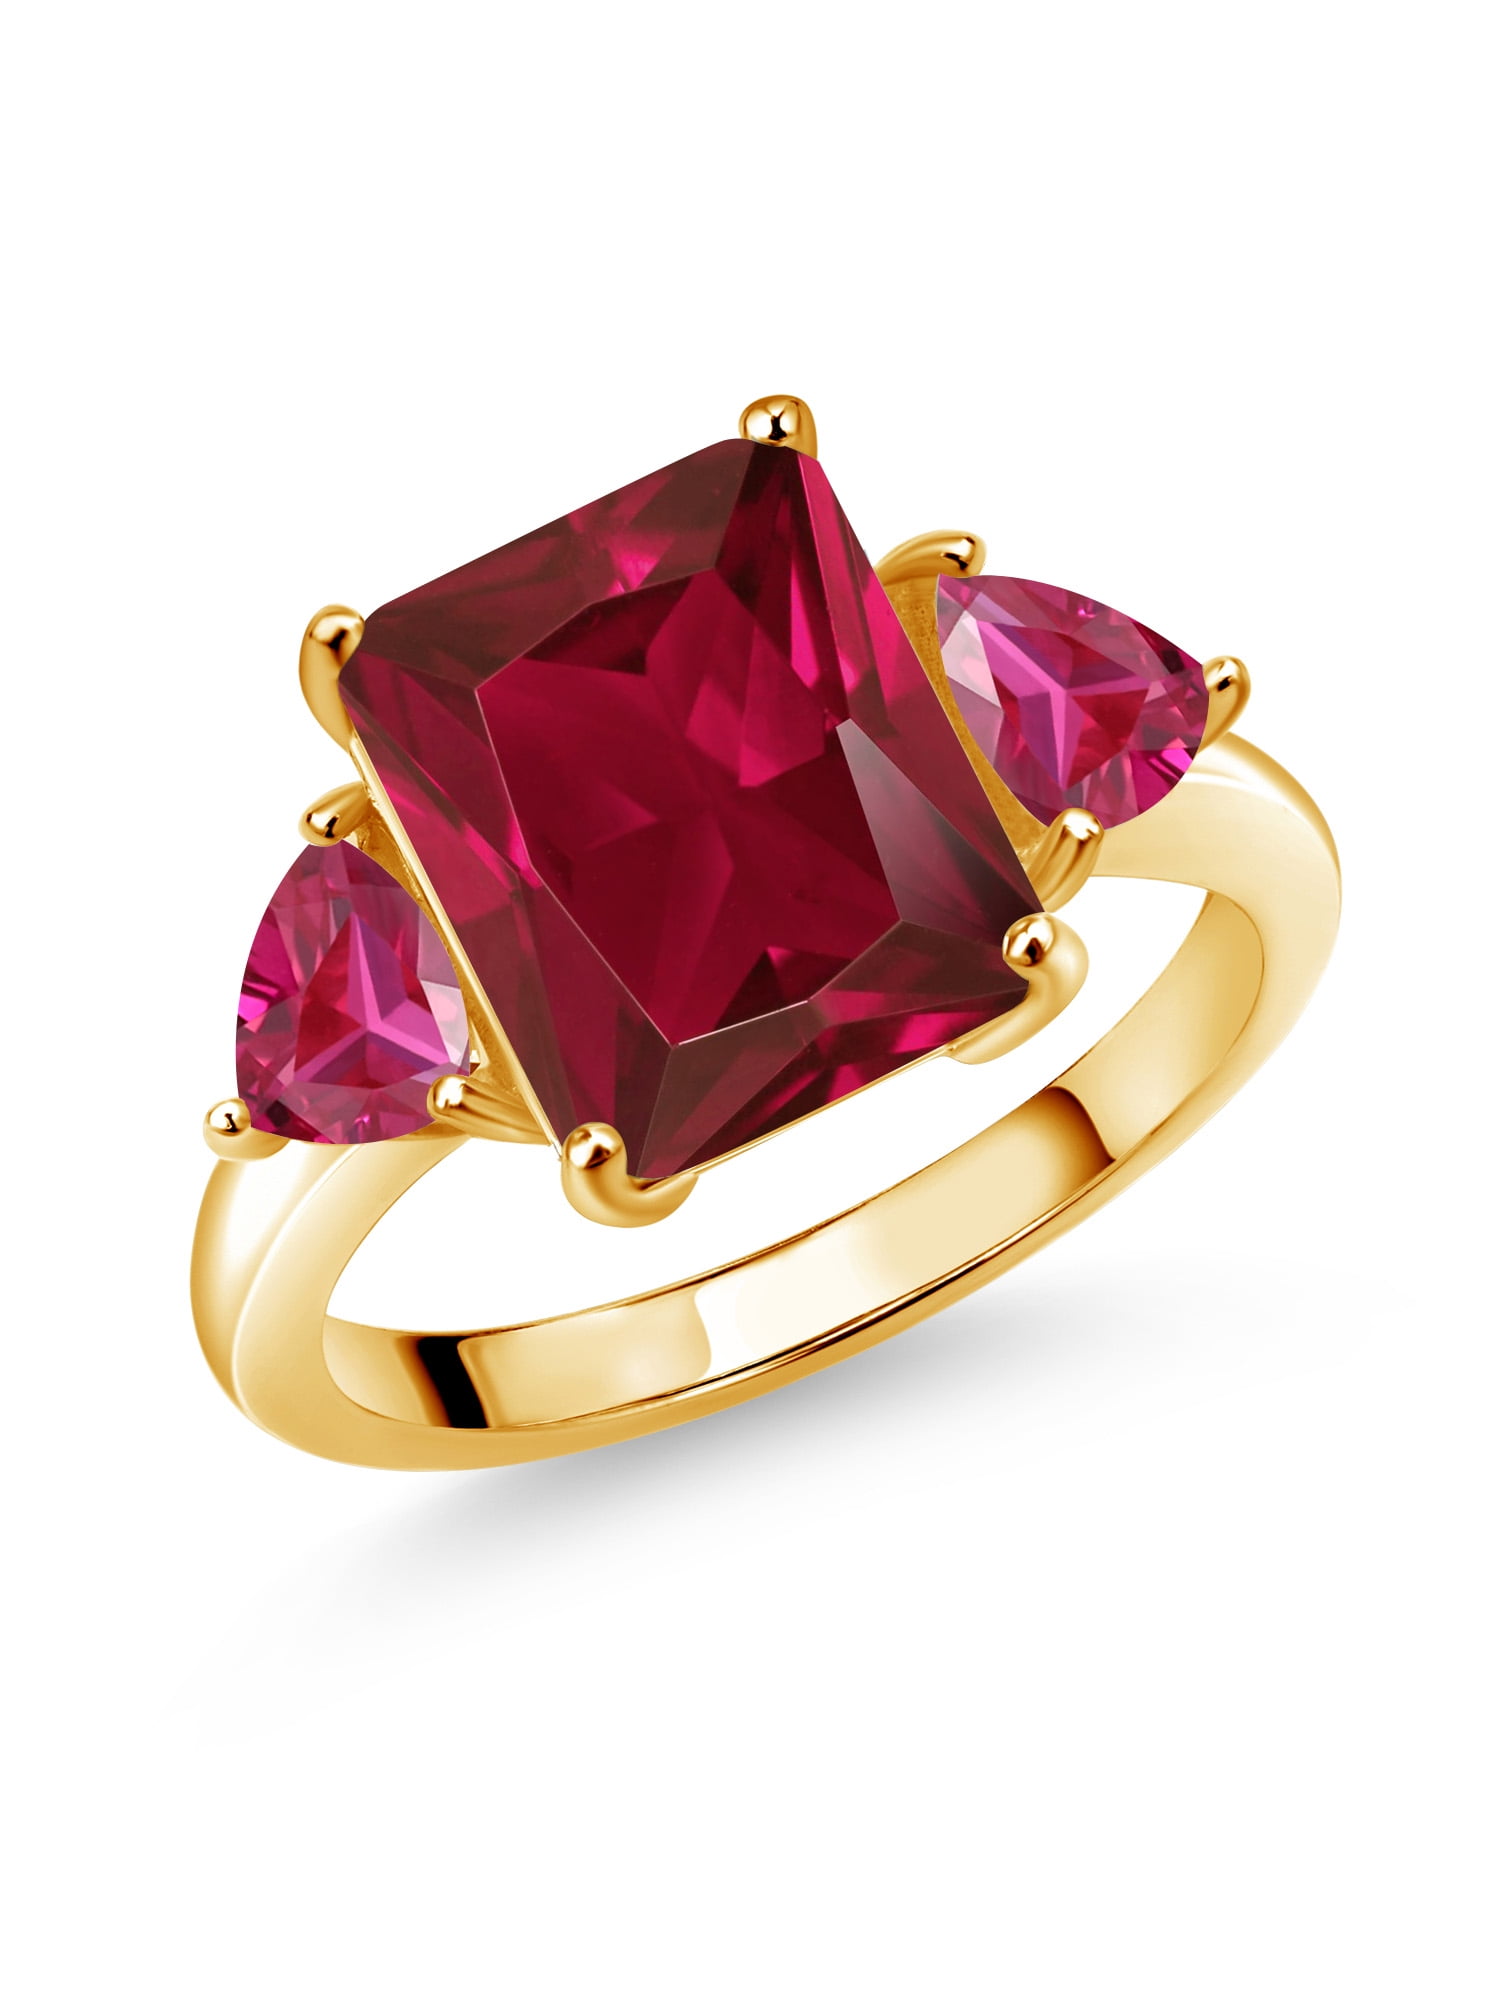 Pigeon Blood ruby ring, 14k Solid gold ring, Oval Pegion Ruby ring, St -  Urban Carats